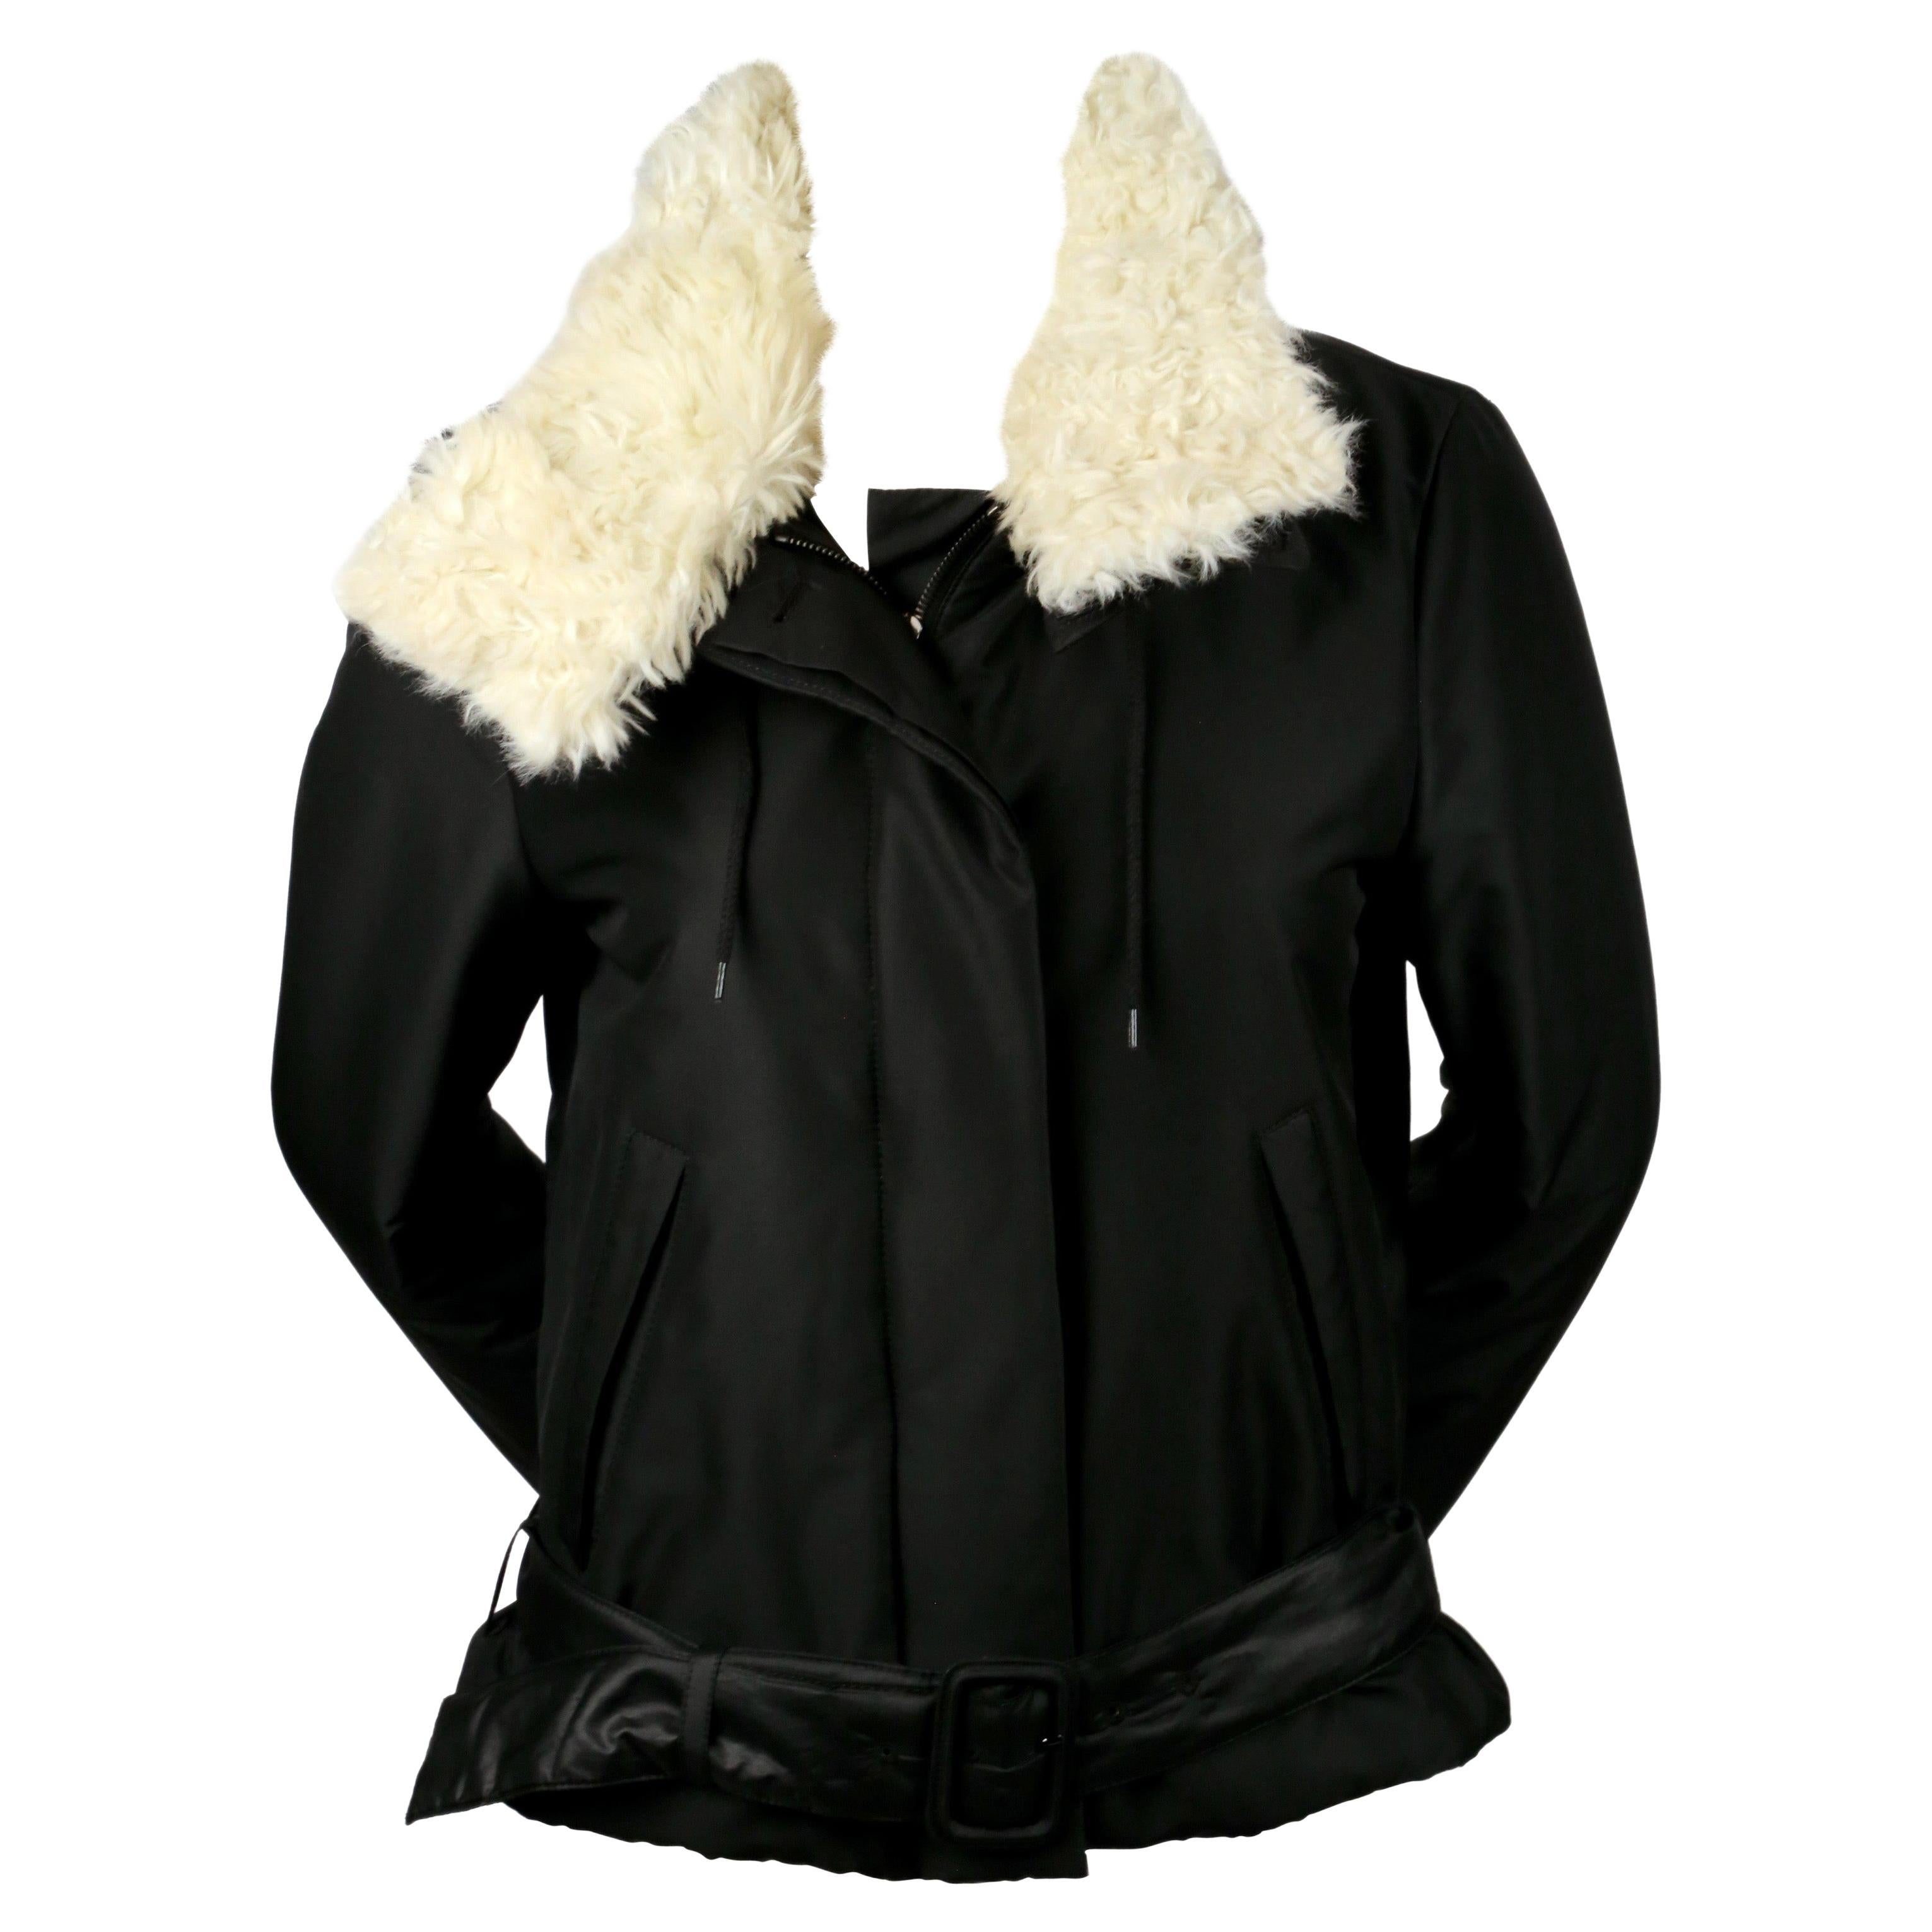 1999 HELMUT LANG black Boa jacket with removable collar